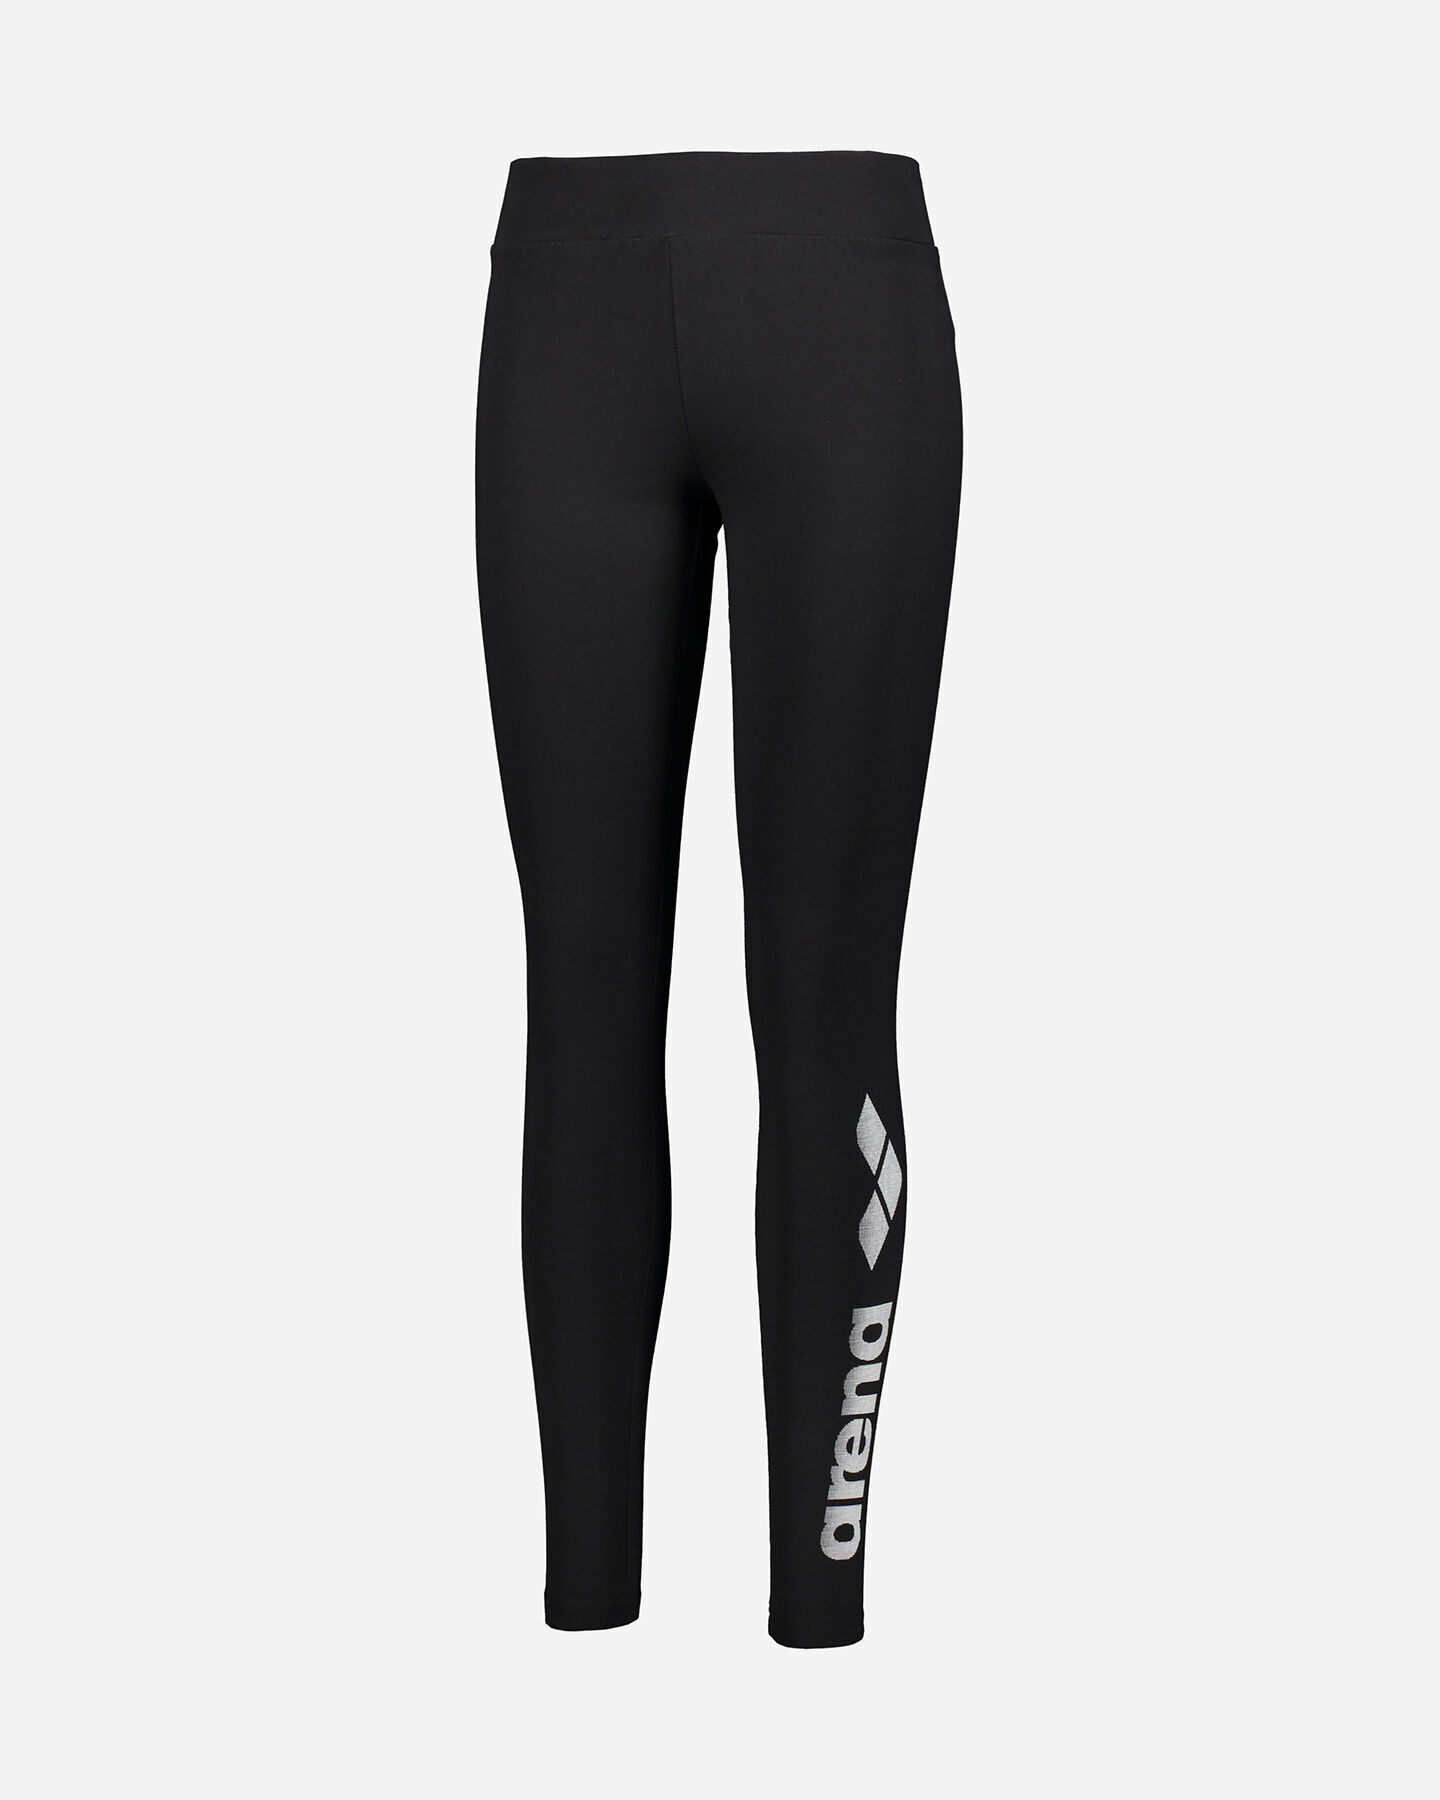  Leggings ARENA JSTRETCH  W S4087534|050|XS scatto 4